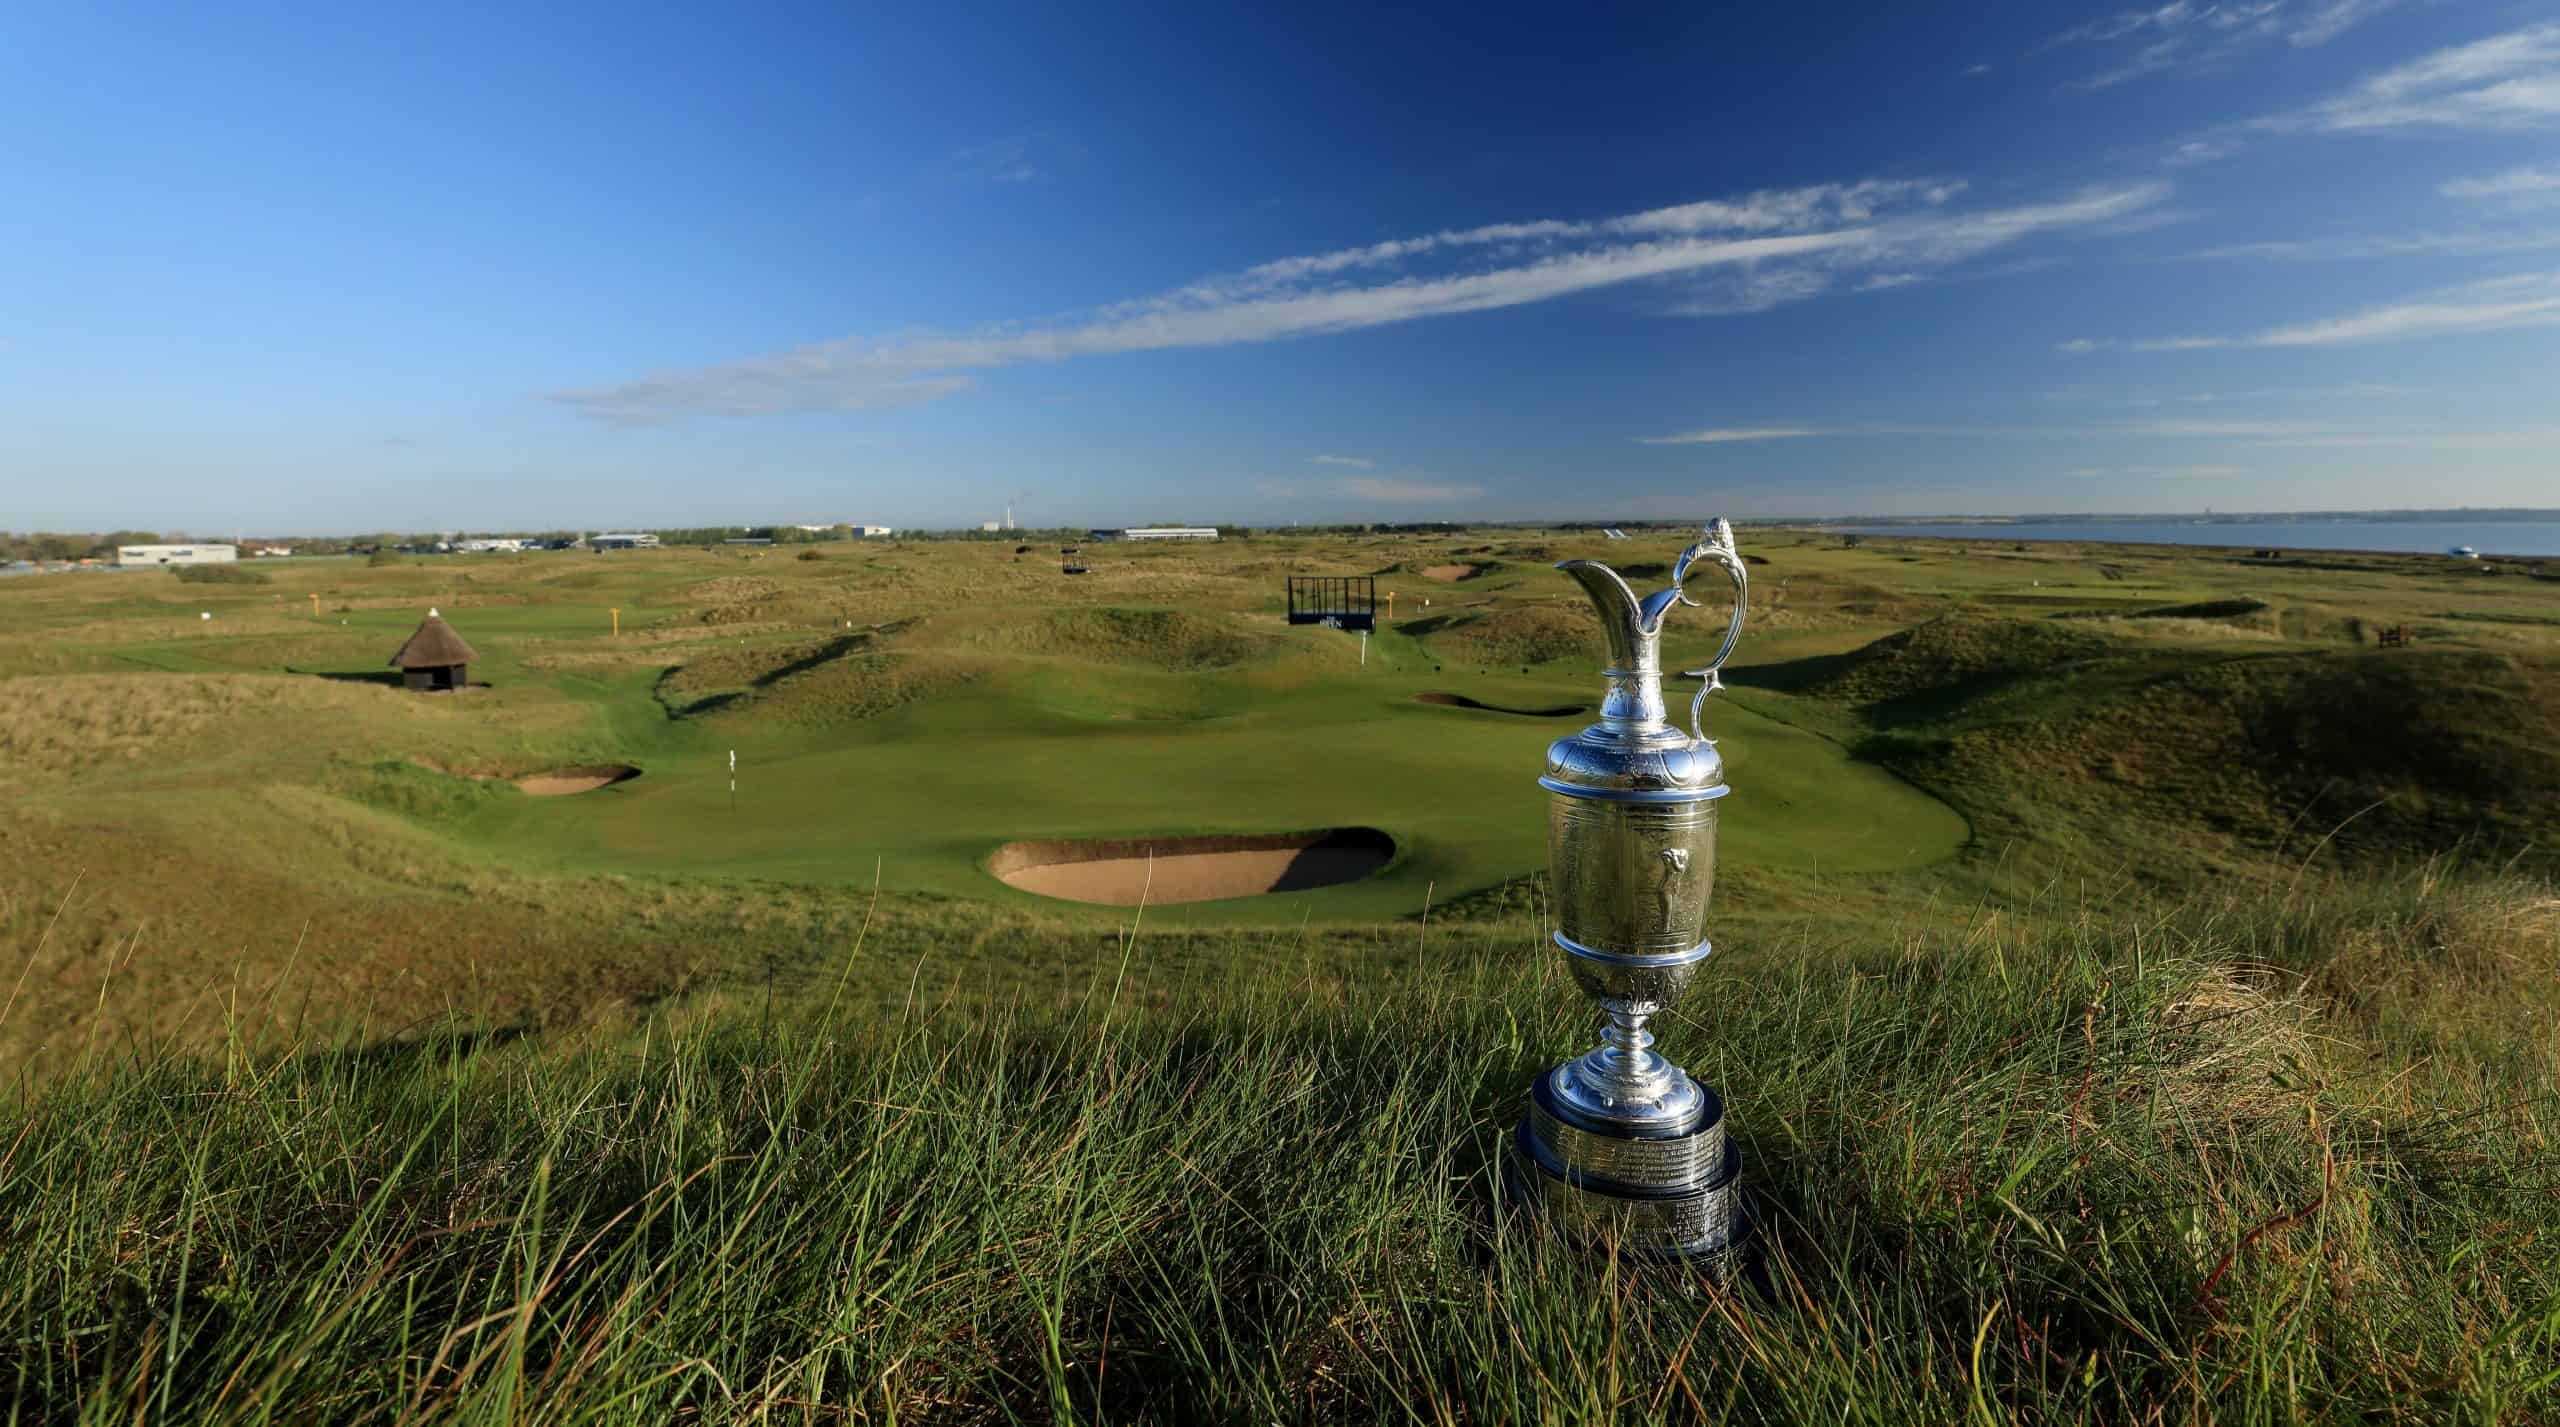 Royal St Georges - The Open returns to South East England